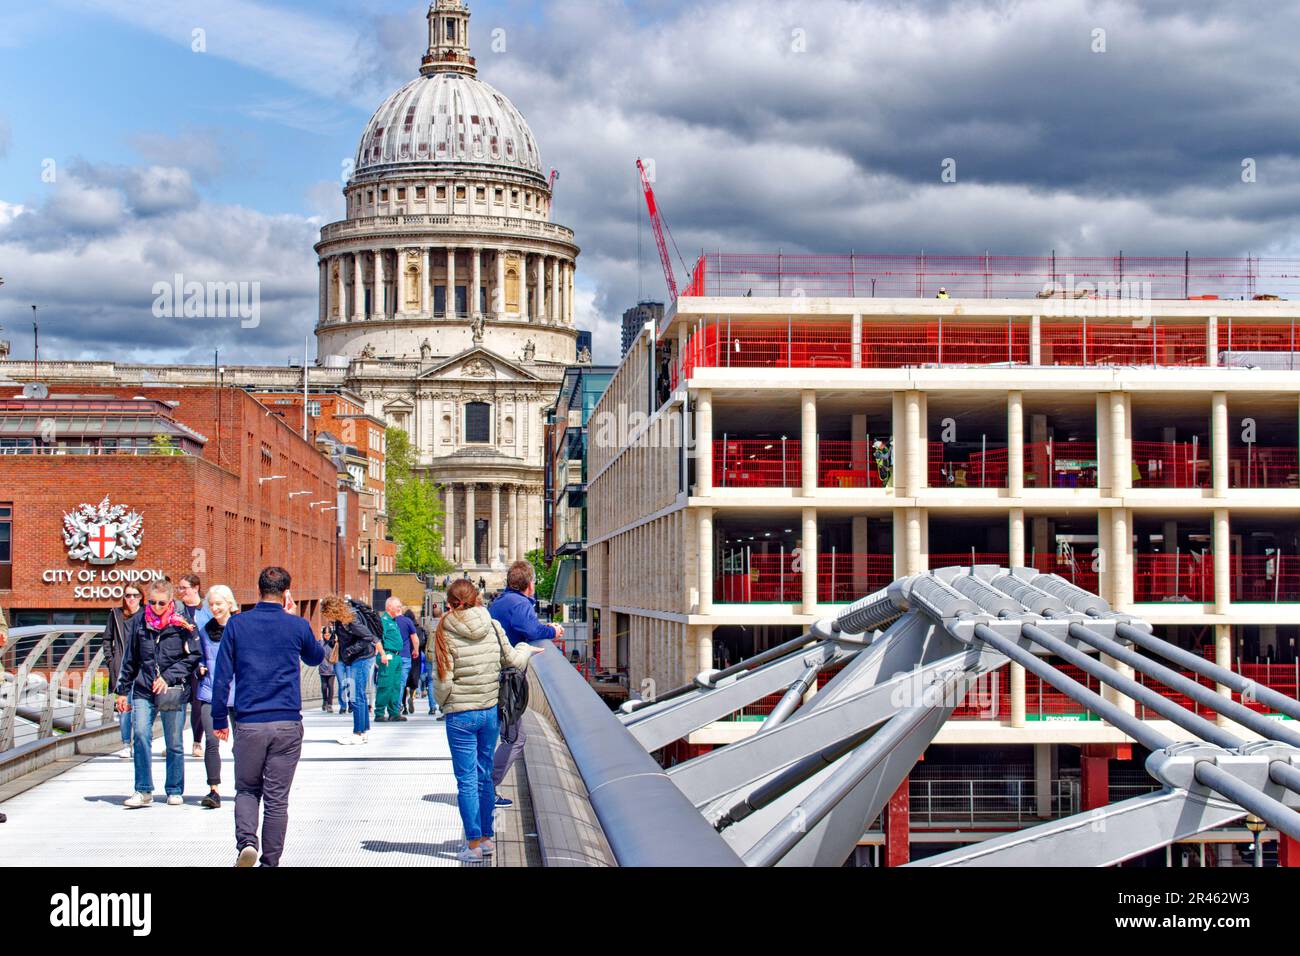 London St Pauls Cathedral the Millennium Footbridge City of London School and a new building construction Stock Photo